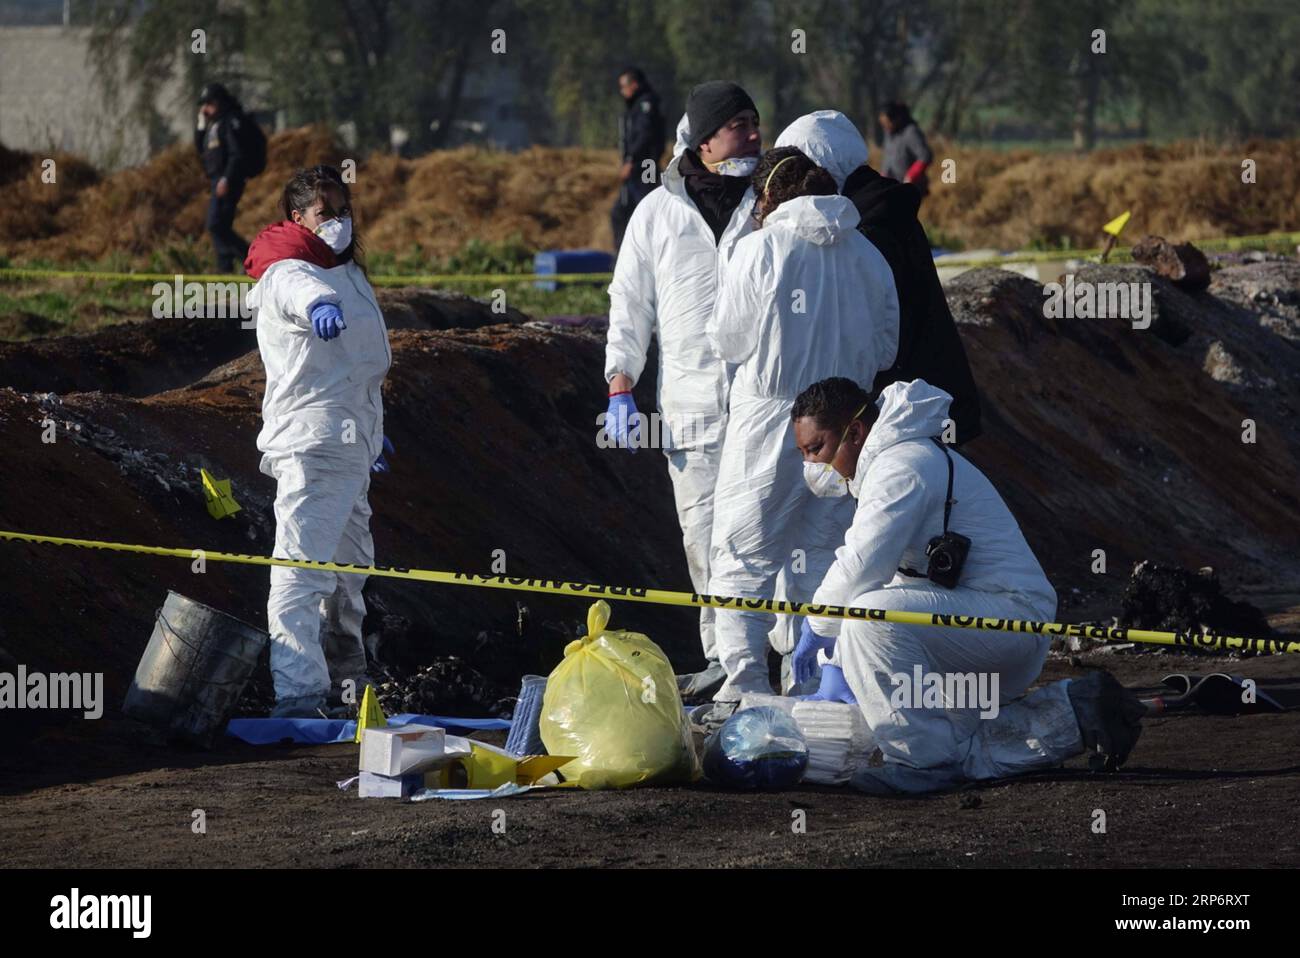 (190119) -- TLAHUELILPAN (MEXICO), Jan. 19, 2019 -- Forensic personnel work at the site of a pipeline explosion in the municipality of Tlahuelilpan, Hidalgo state, Mexico, on Jan. 19, 2019. The death toll from the pipeline explosion here has risen to 66, governor of the state of Hidalgo said on Saturday. ) MEXICO-HIDALGO-PIPELINE-EXPLOSION CarolinaxEndara PUBLICATIONxNOTxINxCHN Stock Photo